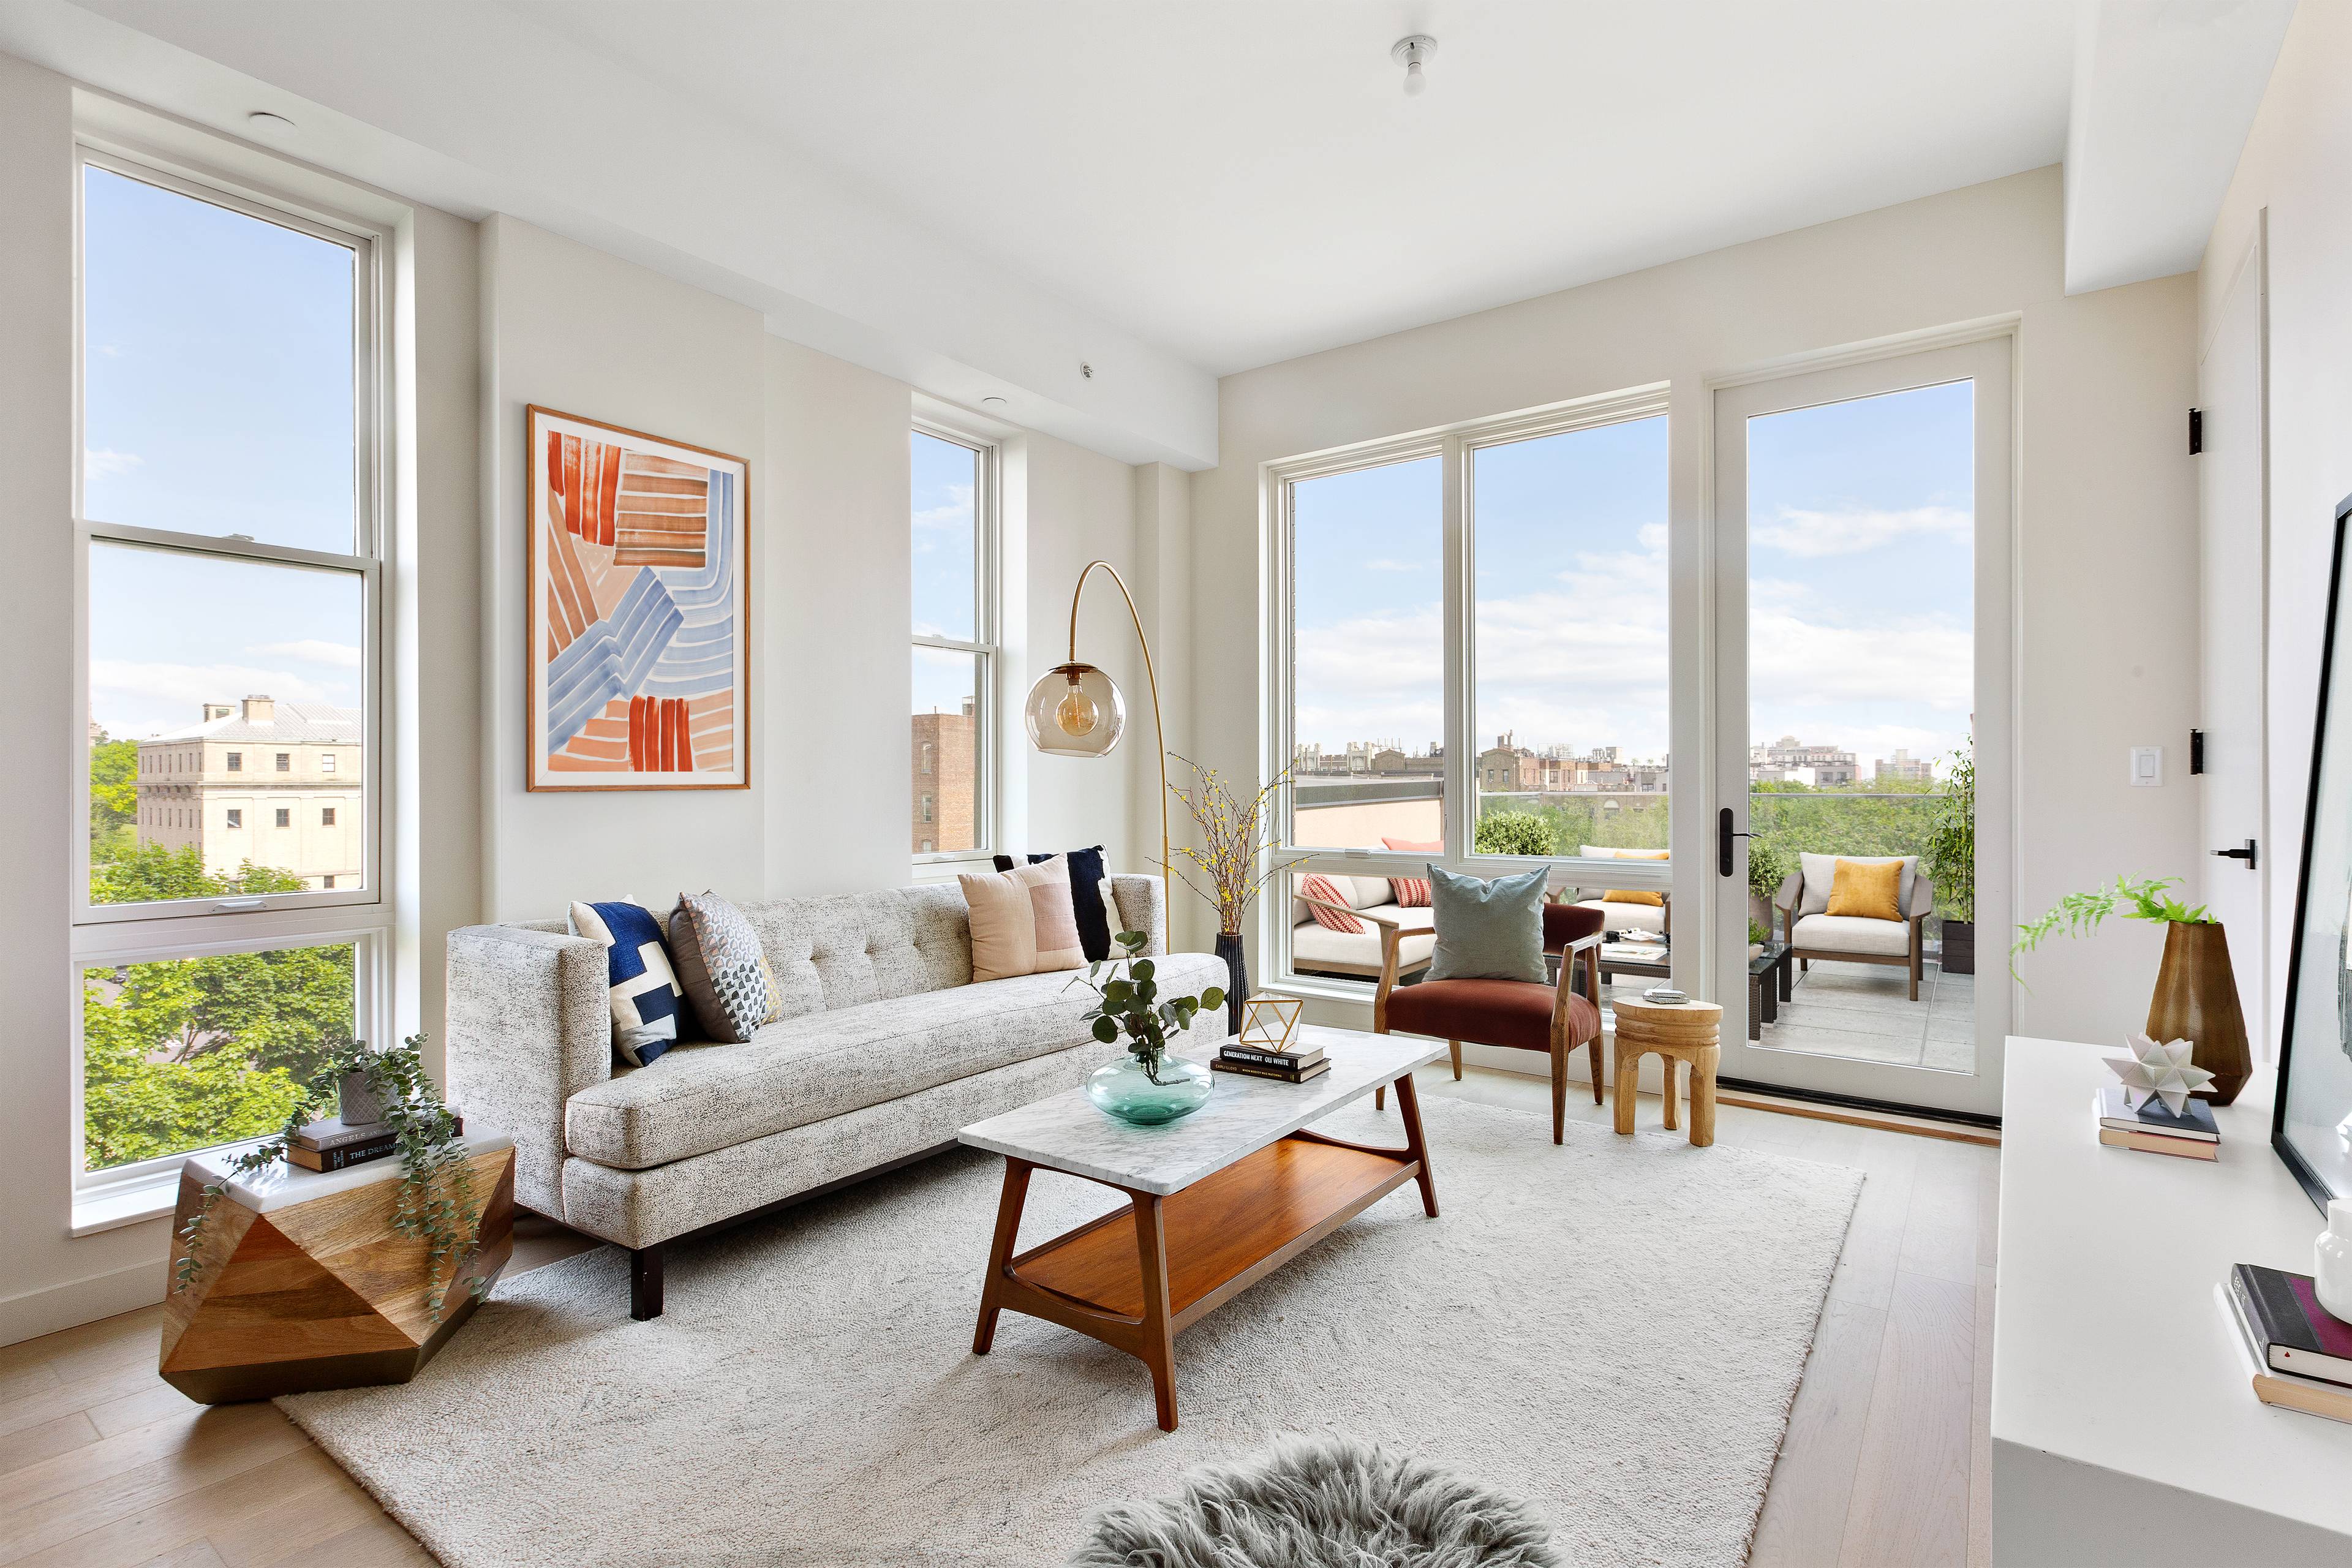 CONTRACT OUT 1000 Union is a boutique collection of 20 expertly crafted residences designed by Fischer Makooi Architects, bringing a new standard of livable luxury to Crown Heights.